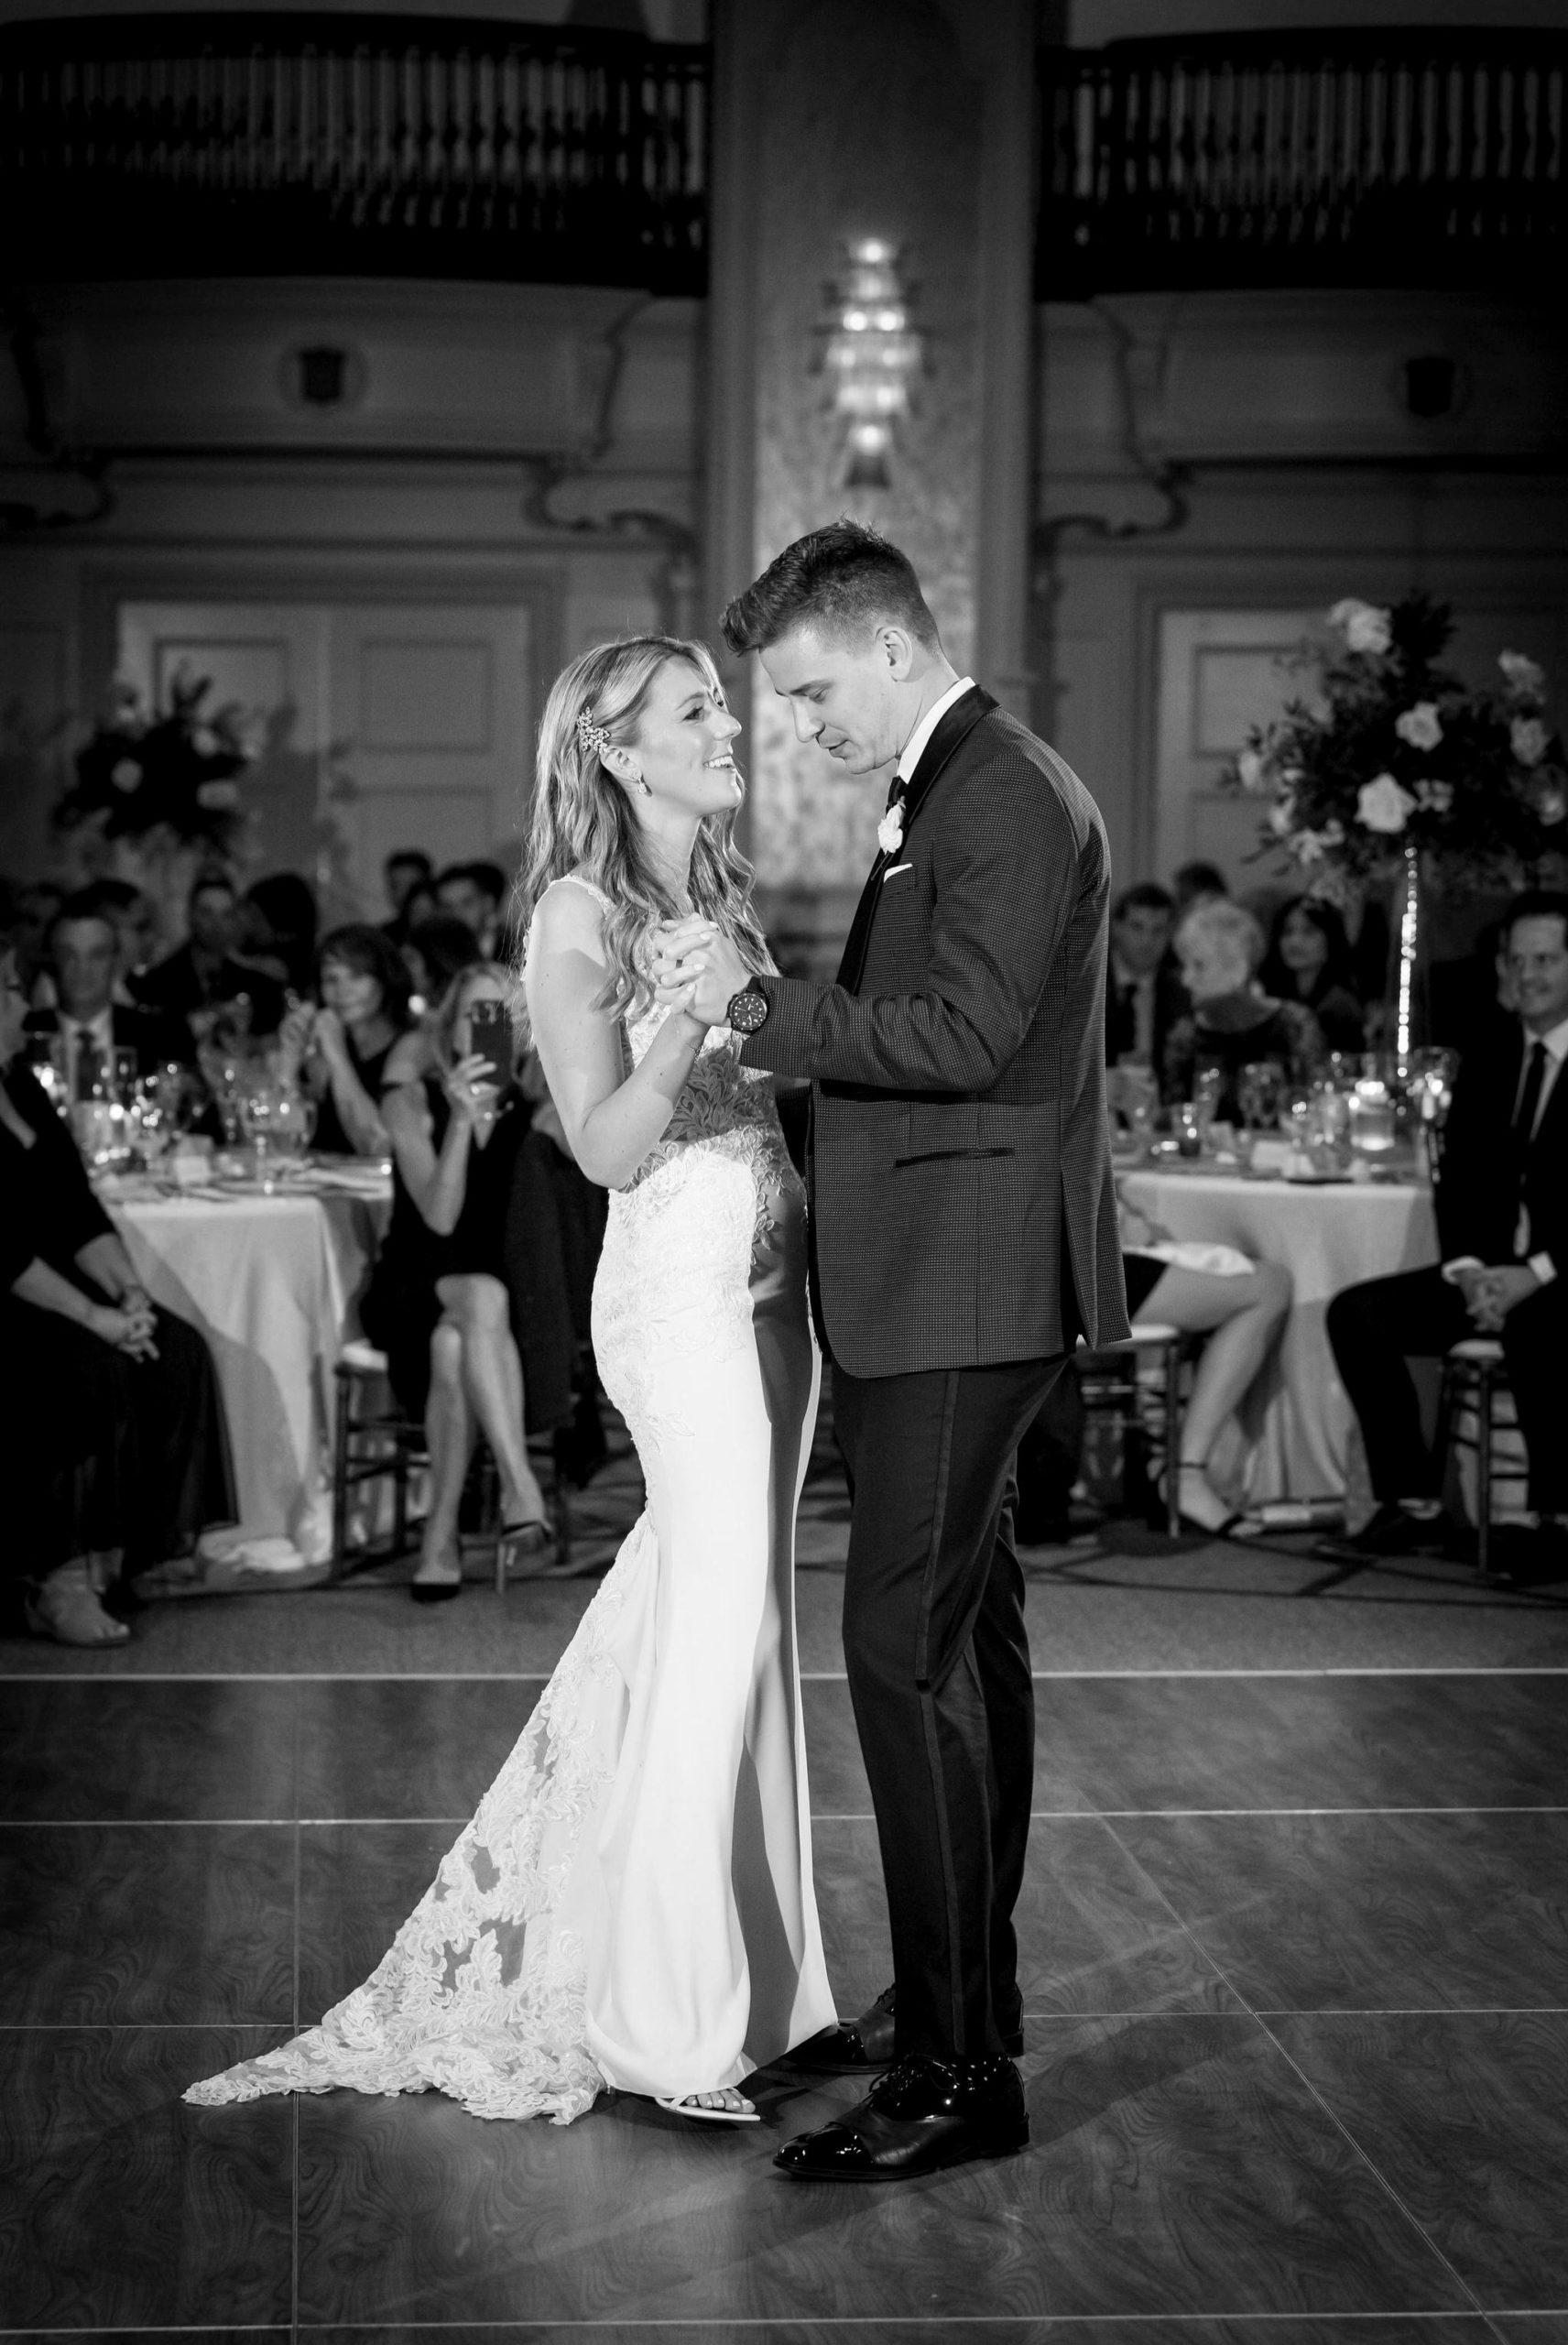 A bride and groom dance their first dance at their Westin Book Cadillac wedding reception.